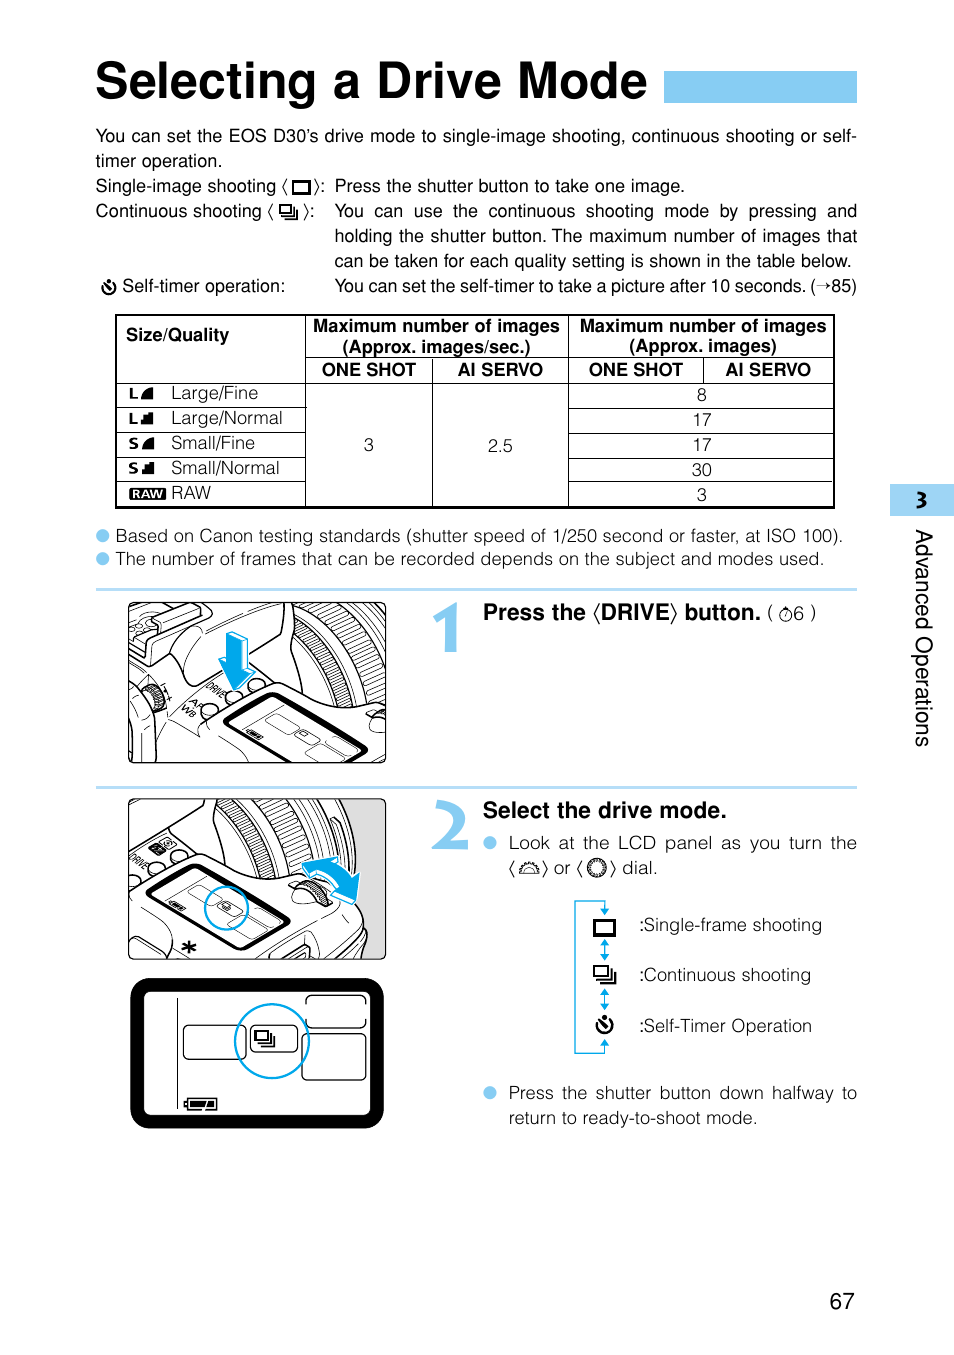 Selecting a drive mode | Canon EOS D30 User Manual | Page 67 / 152